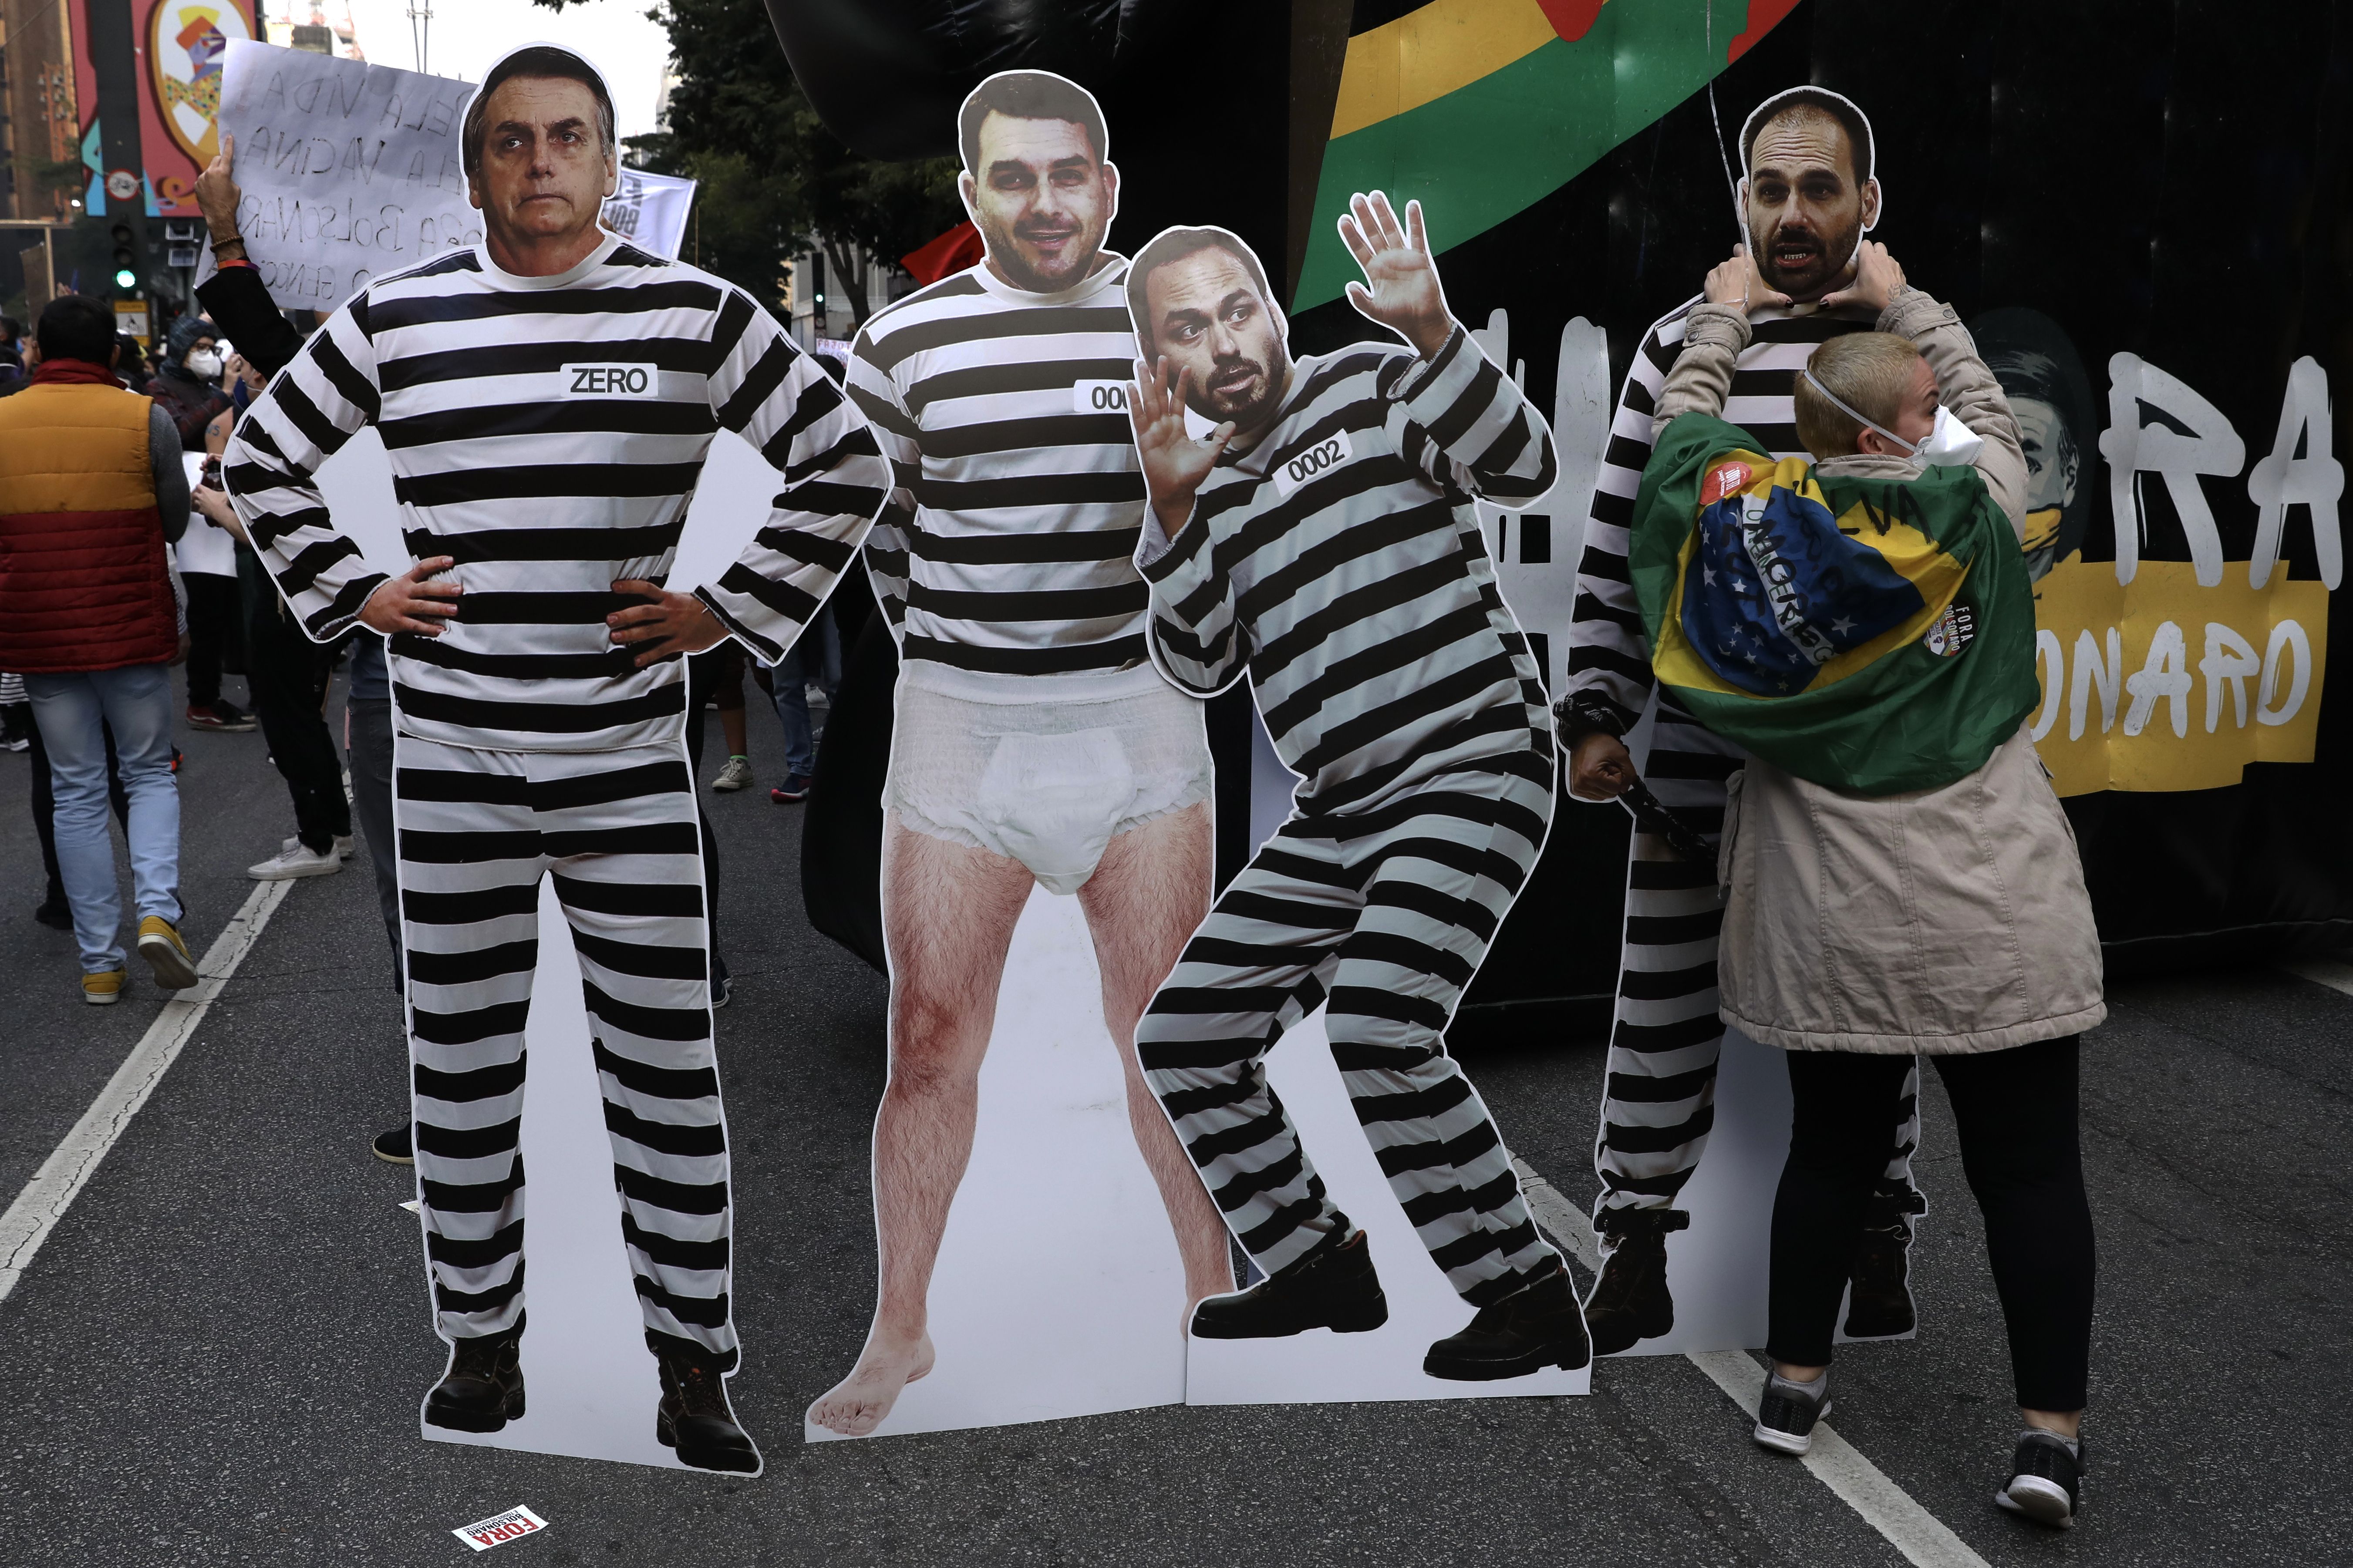 A demonstrator stands with boards depicting Jair Bolsonaro (L) and his son (R) as prisoners during a protest against Bolsonaro's administration on June 19, 2021 in Sao Paulo, Brazil.